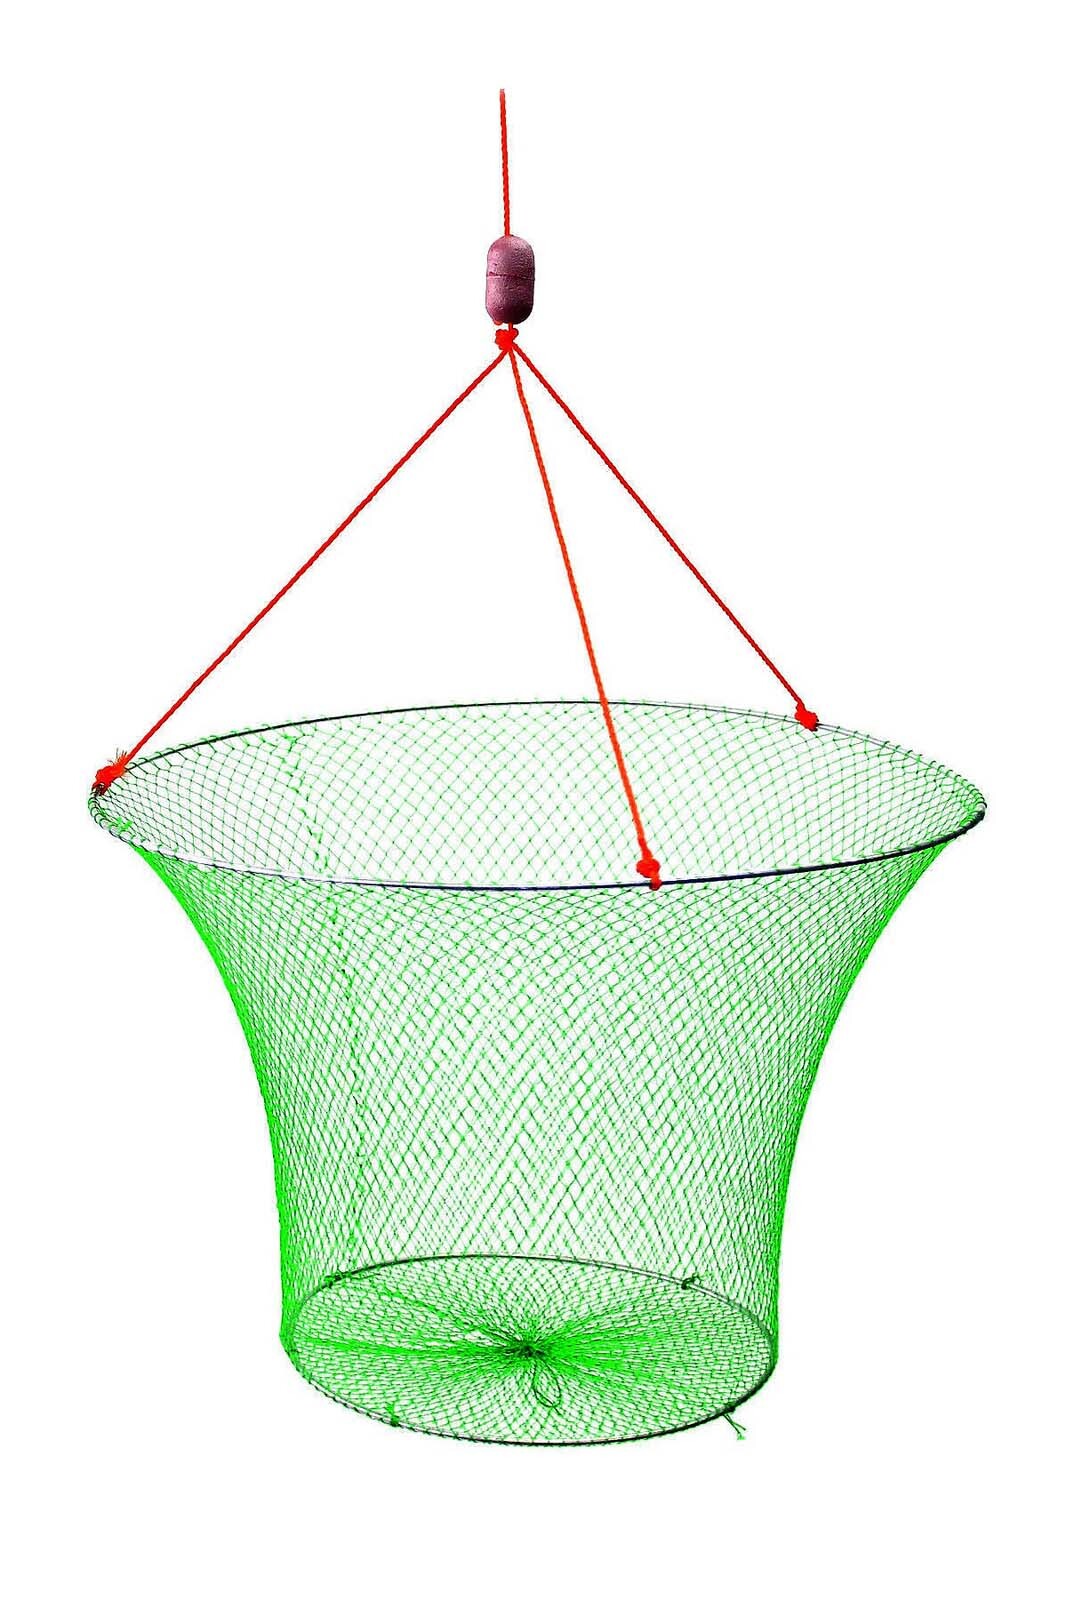 Seahorse Double Ring Yabbie Net With 3/4 Inch Mesh - Drop Net